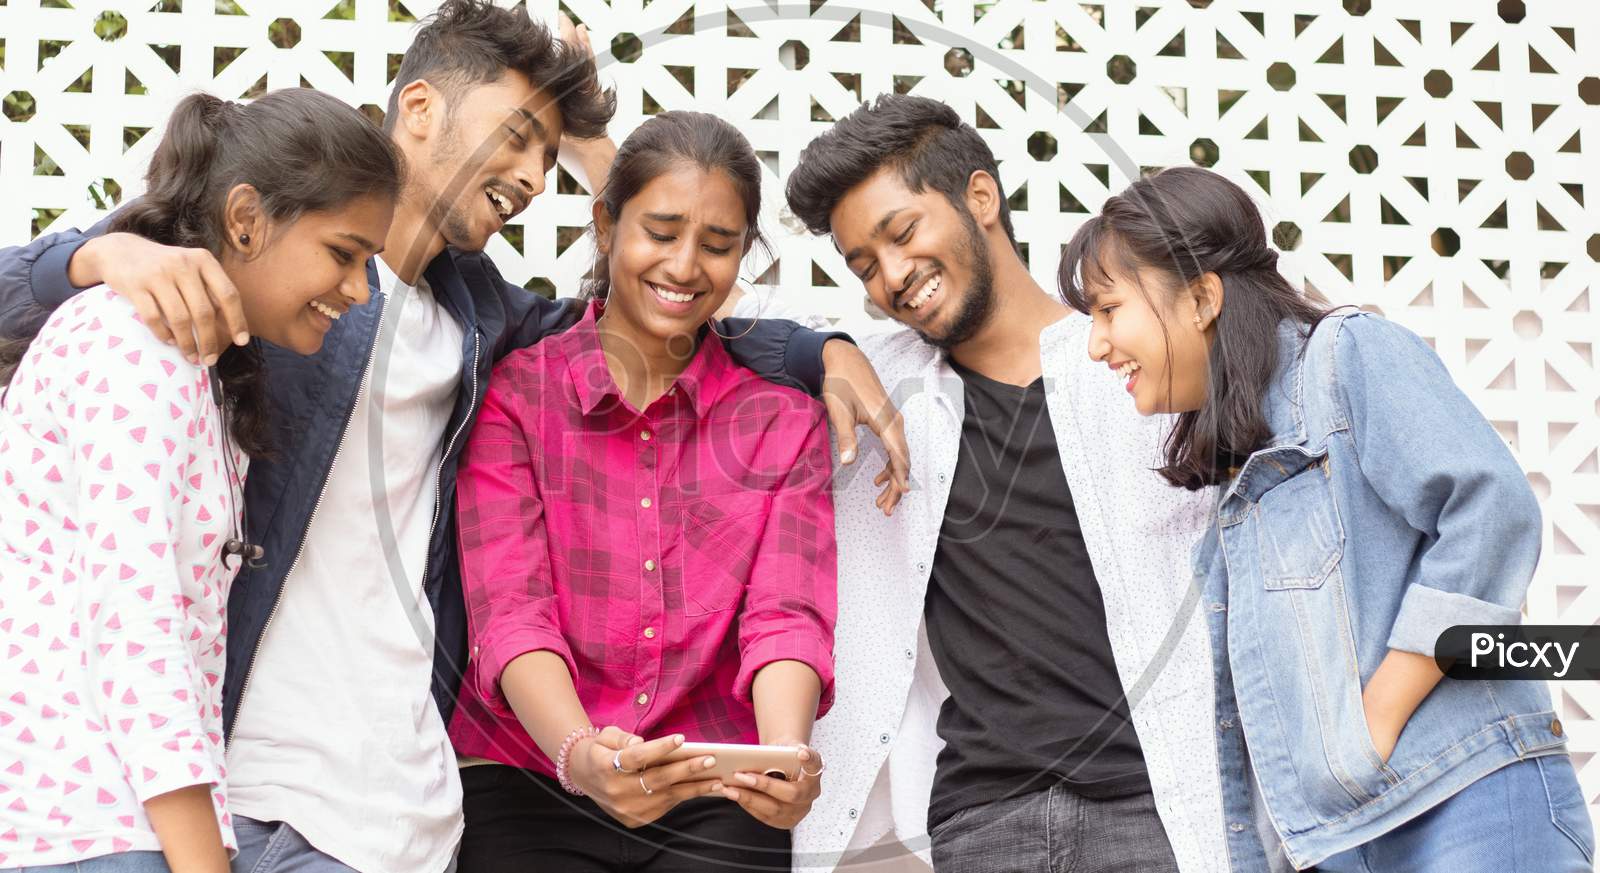 A Group of Happy Young People using a Mobile Phone or Smartphone At Outdoors